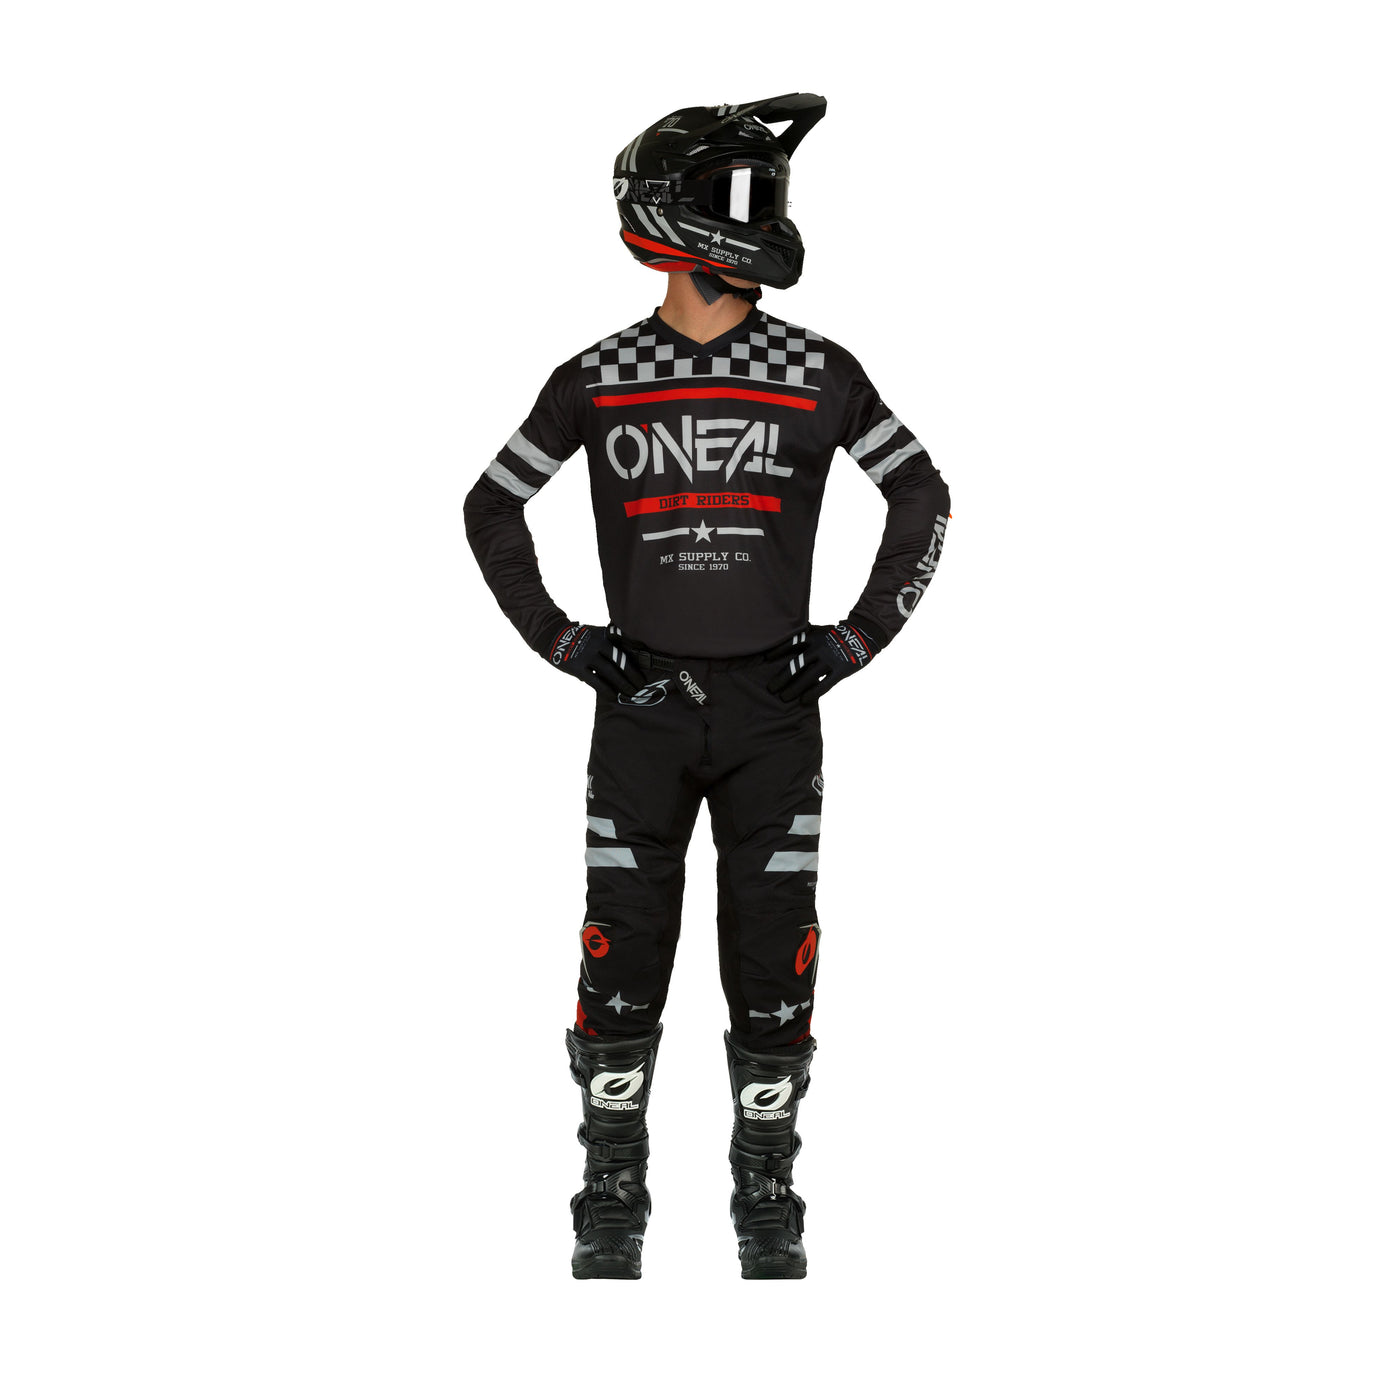 ONEAL ELEMENT SQUADRON Black/Gray Jersey Set